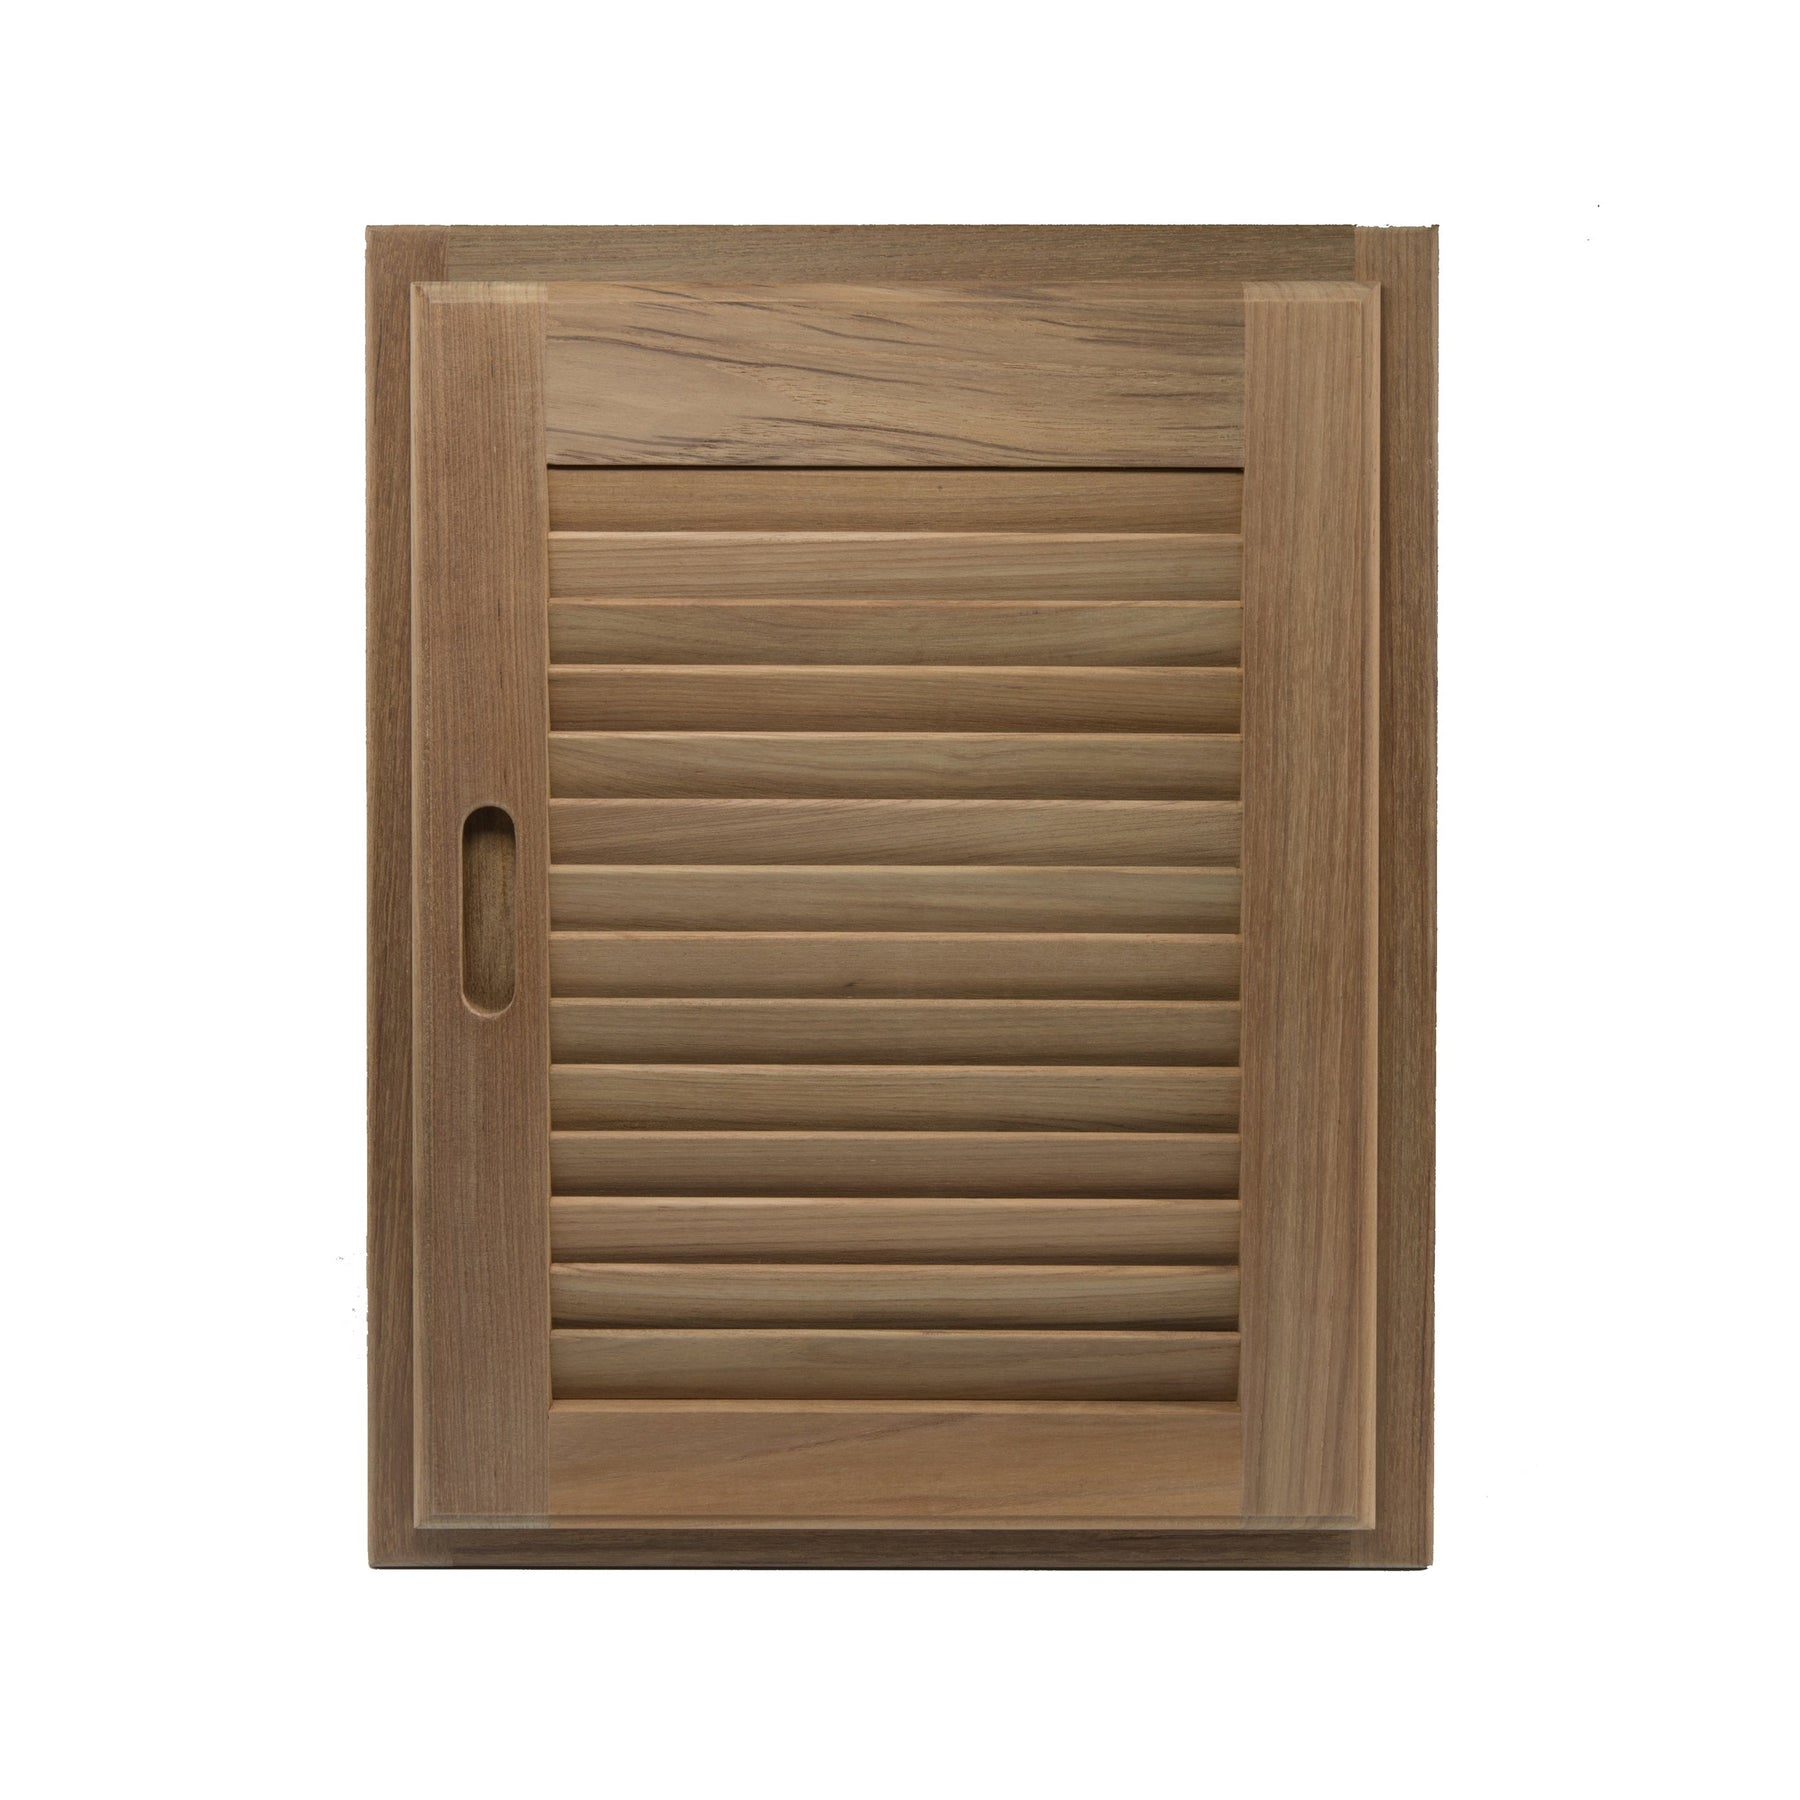 15" x 20" Louvered Door & Frame - Right - 60724